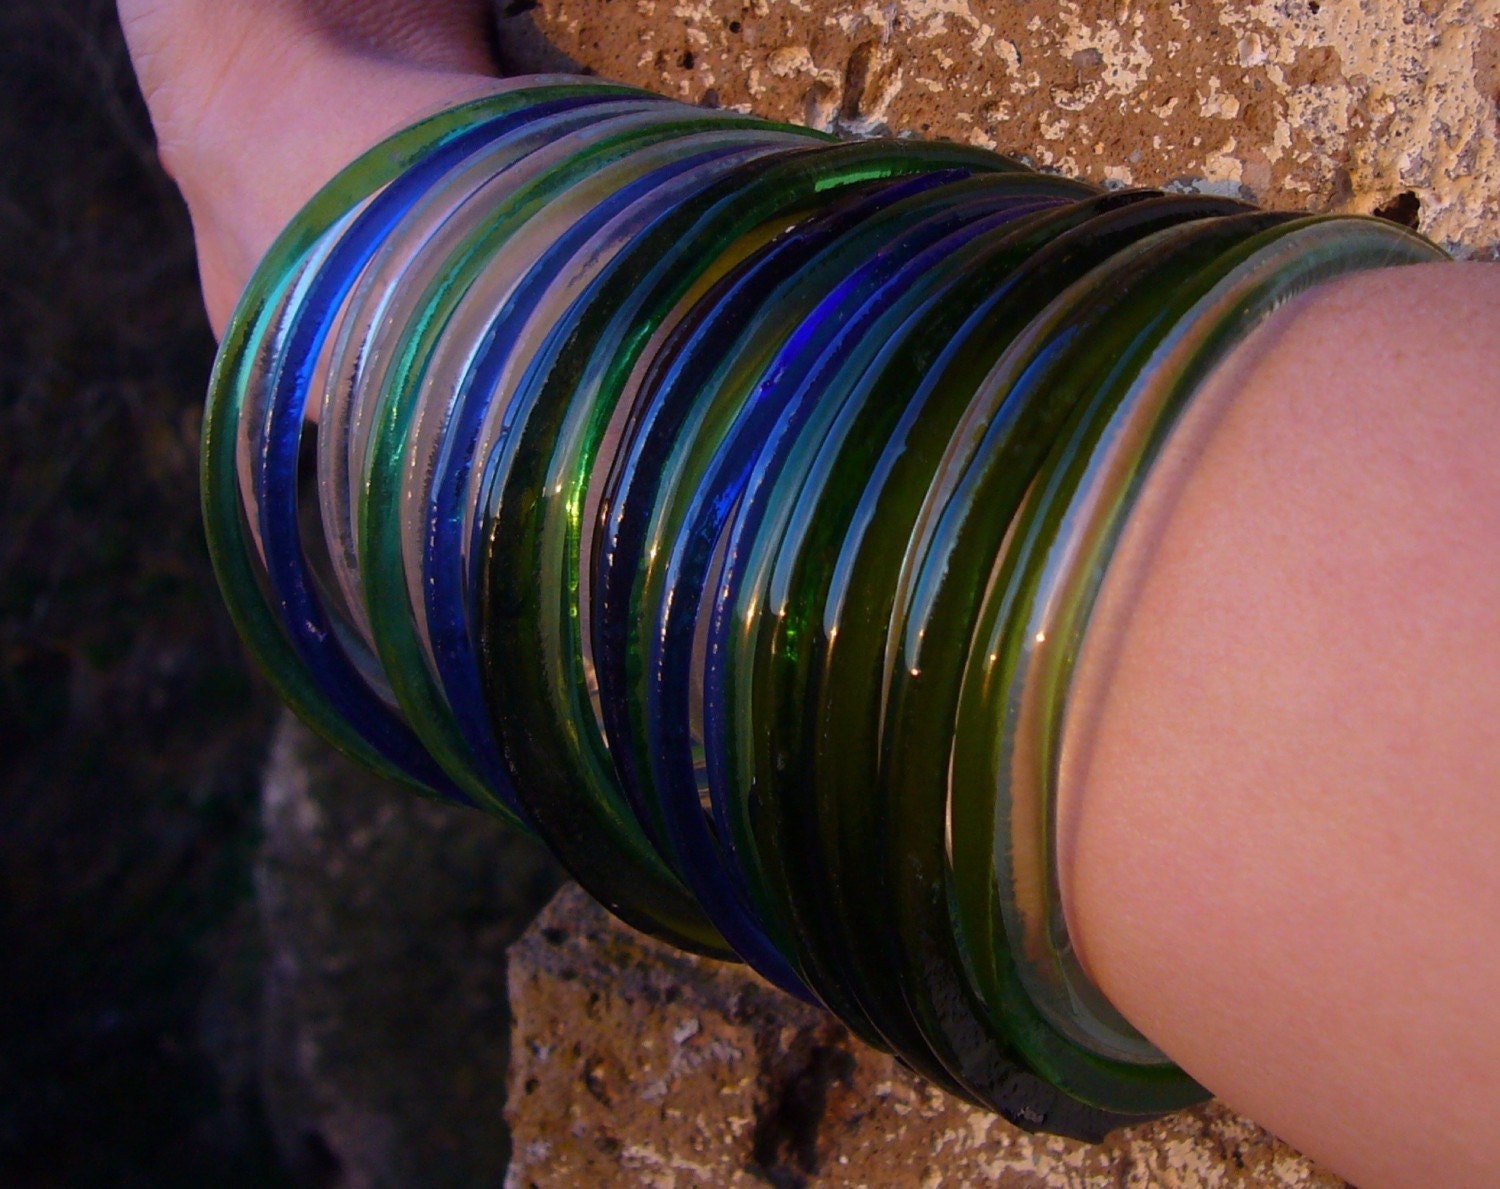 Recycled glass bangles